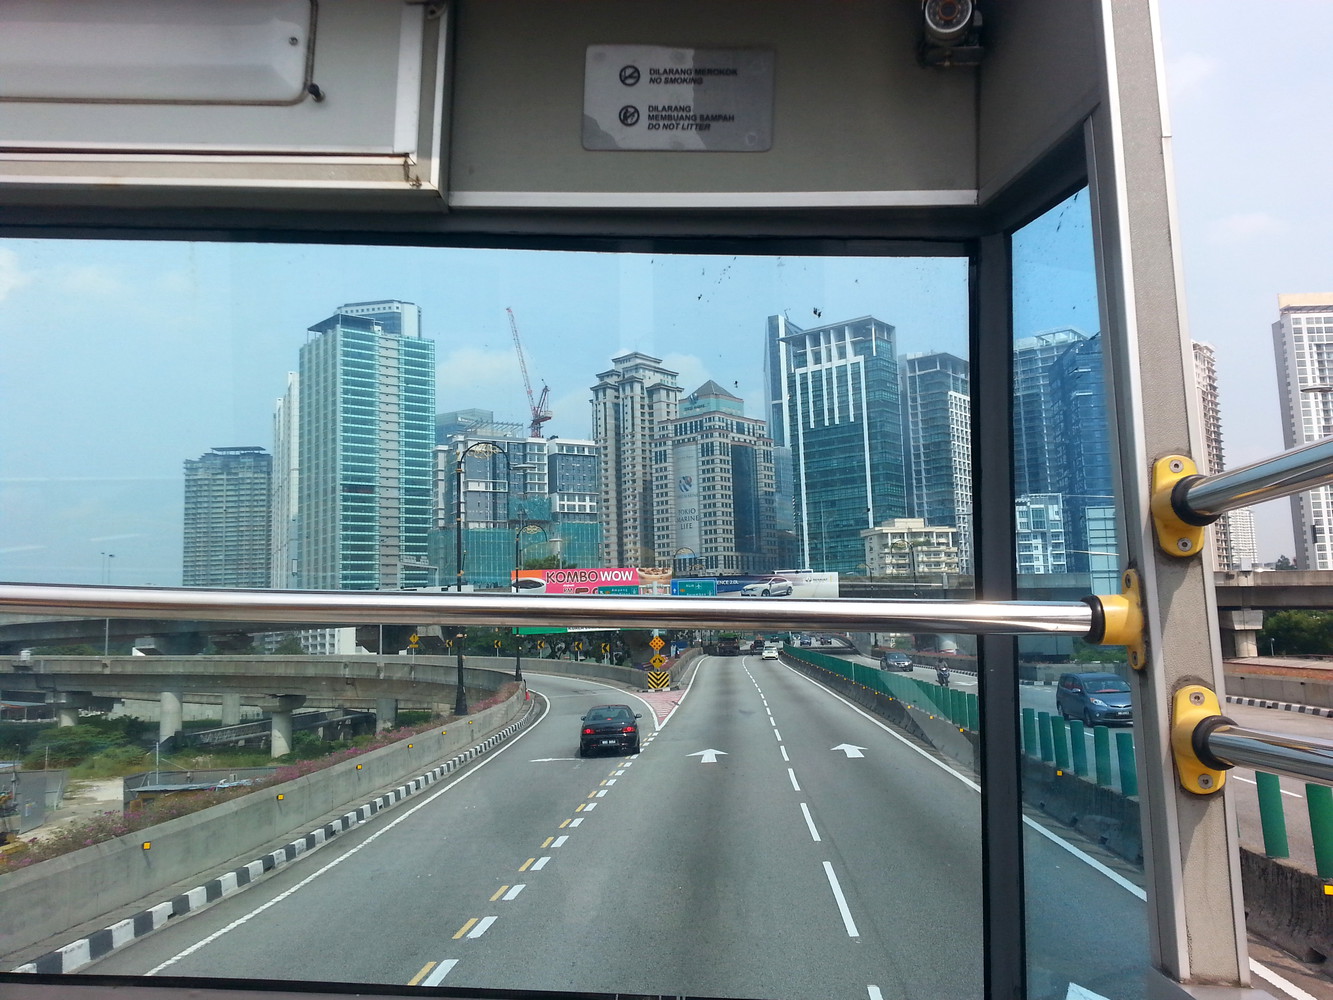 Tall buildings and overpasses as seen from the top of a hop on hop off bus